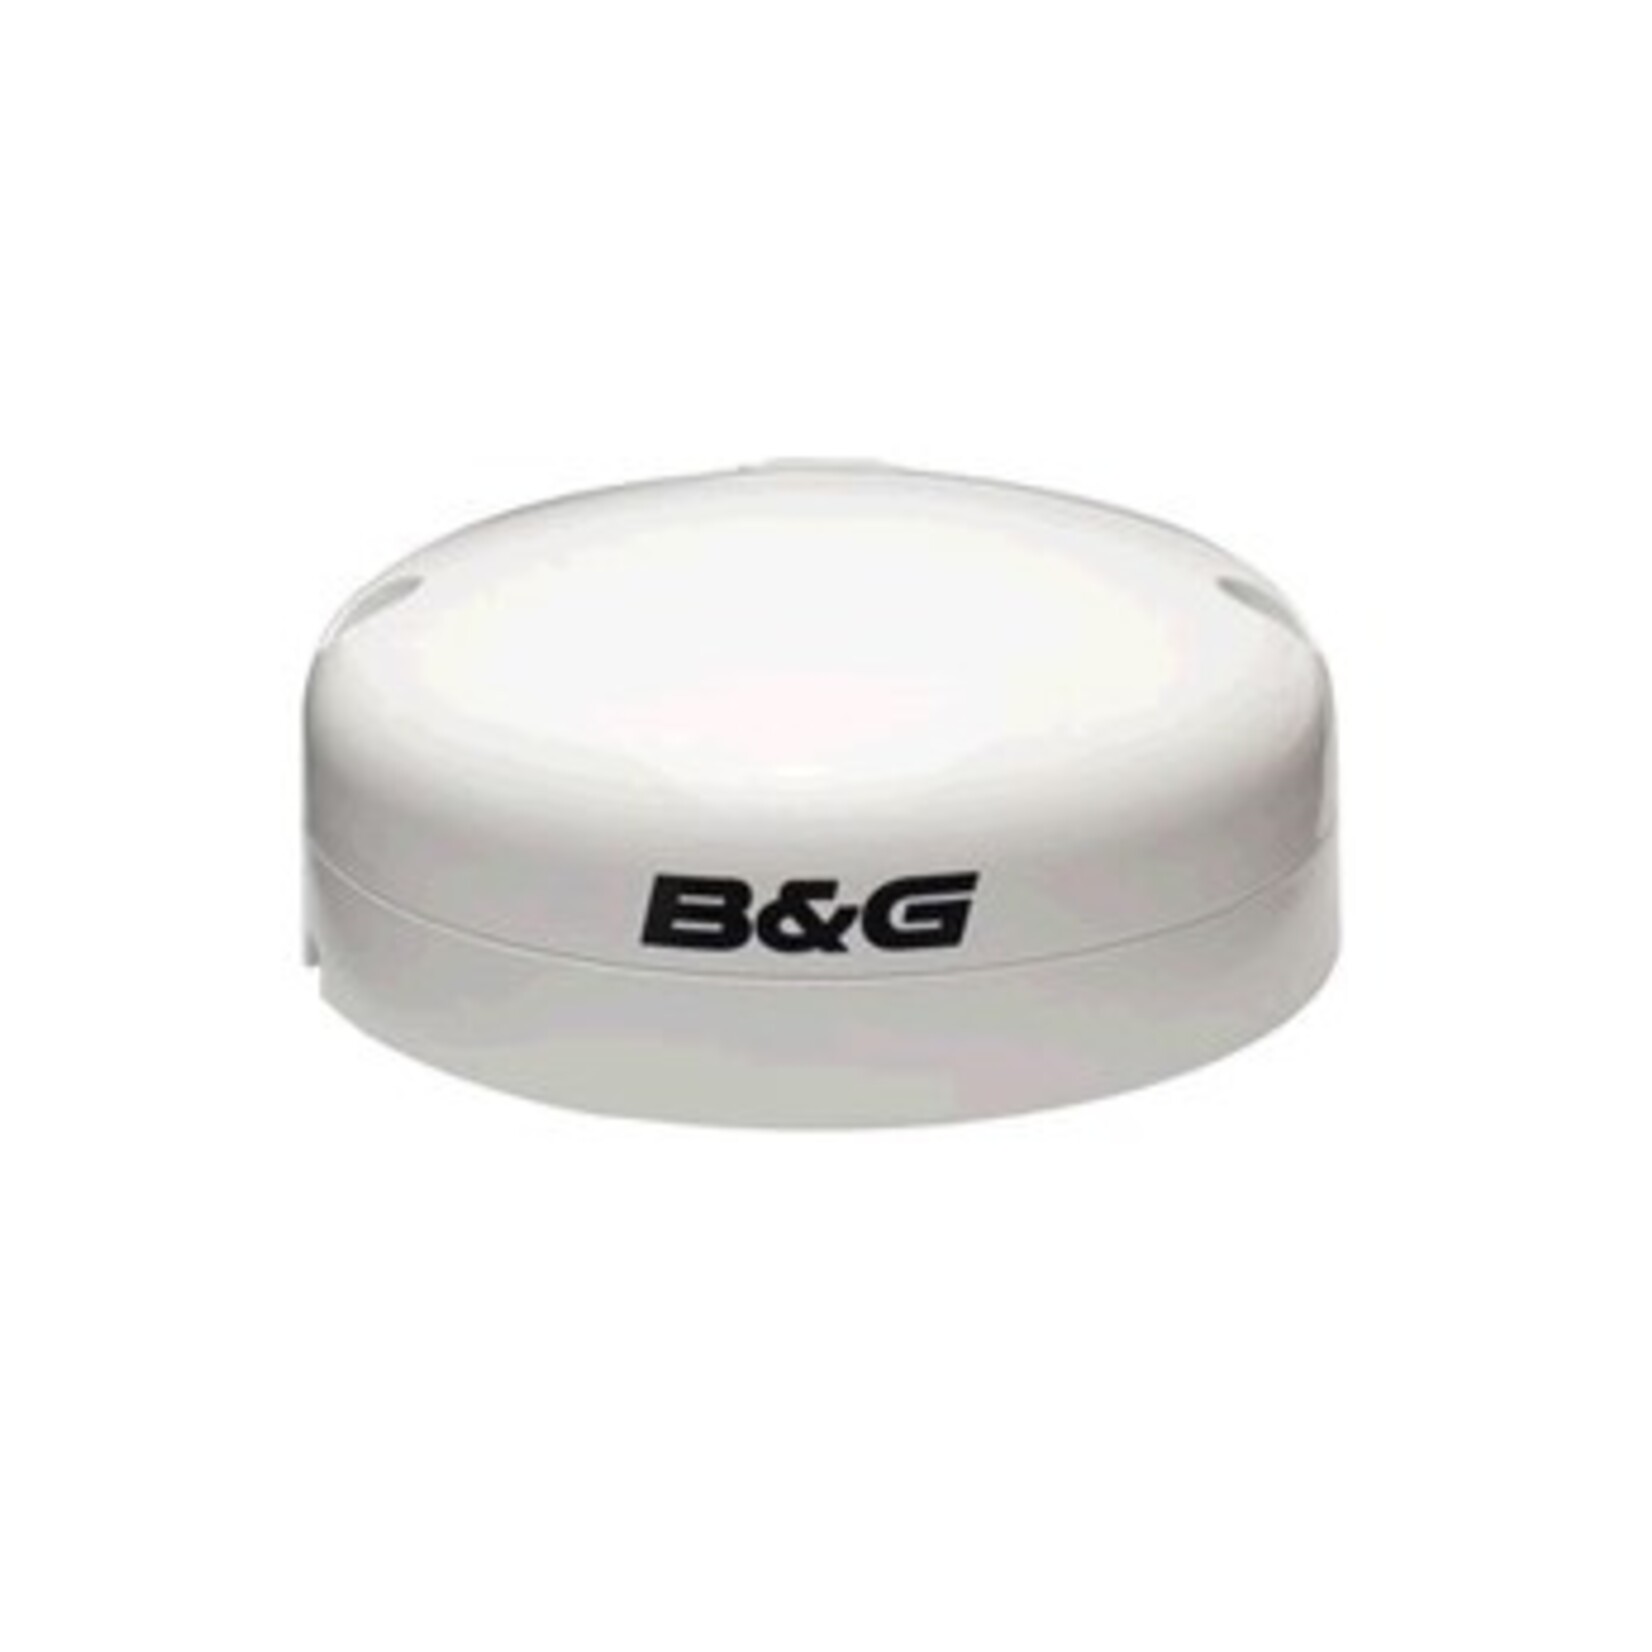 B&G  B&G ZG100 GPS Antenna with Integrated Compass.